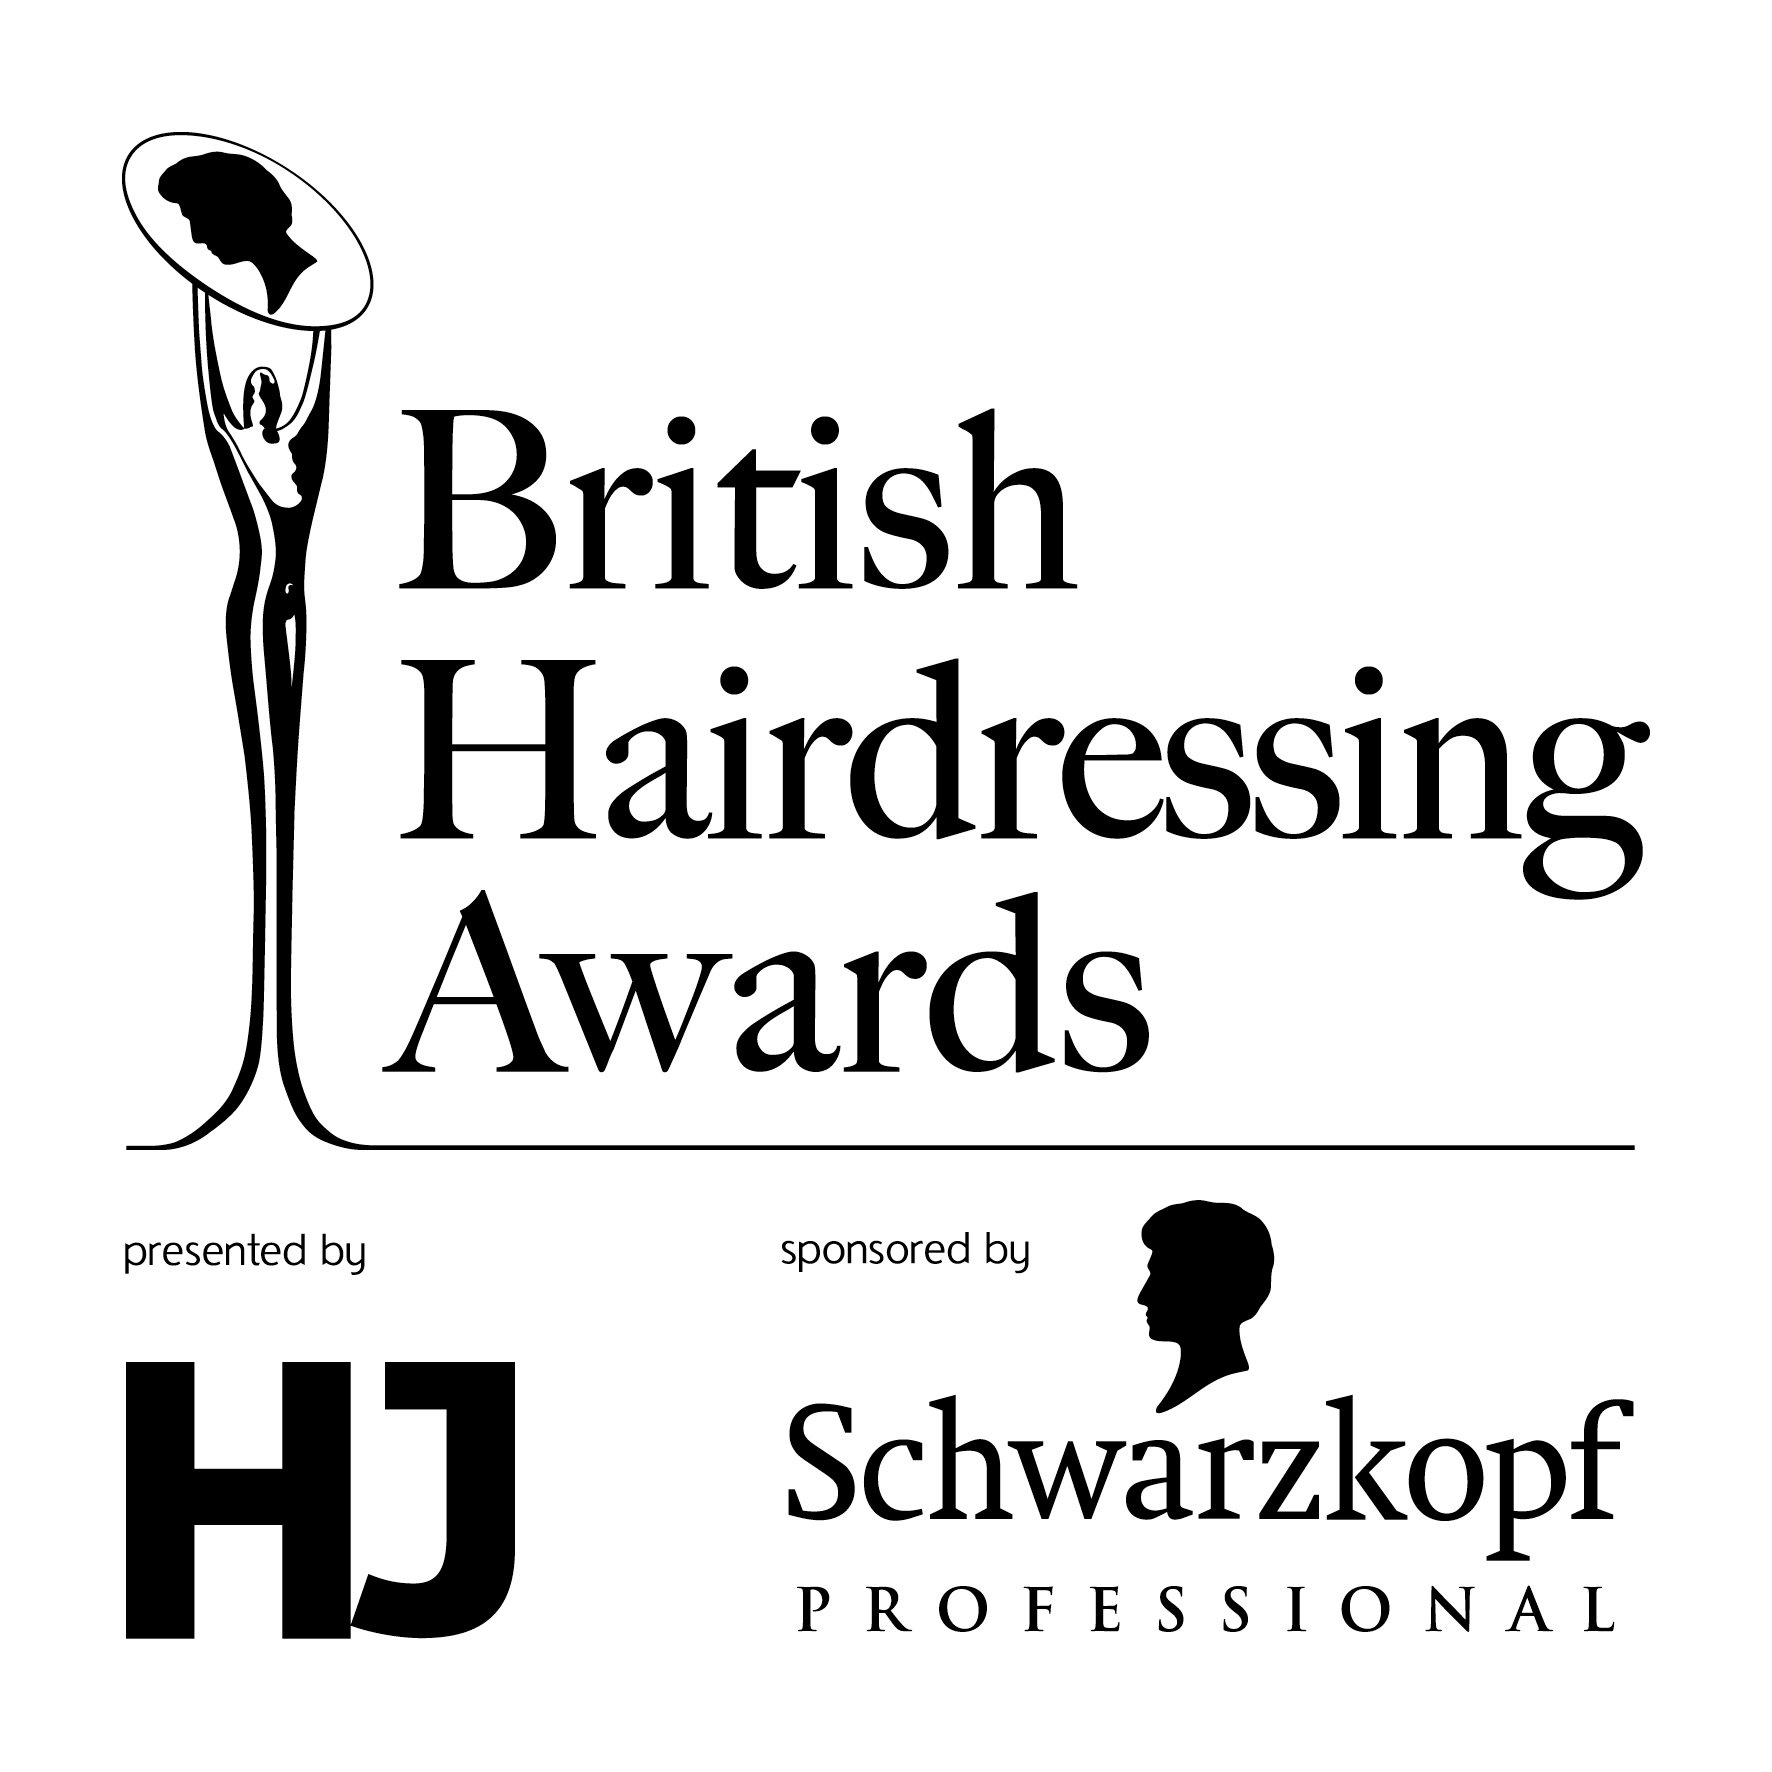 KAM Announced as Finalists at British Hairdressing Awards 2017